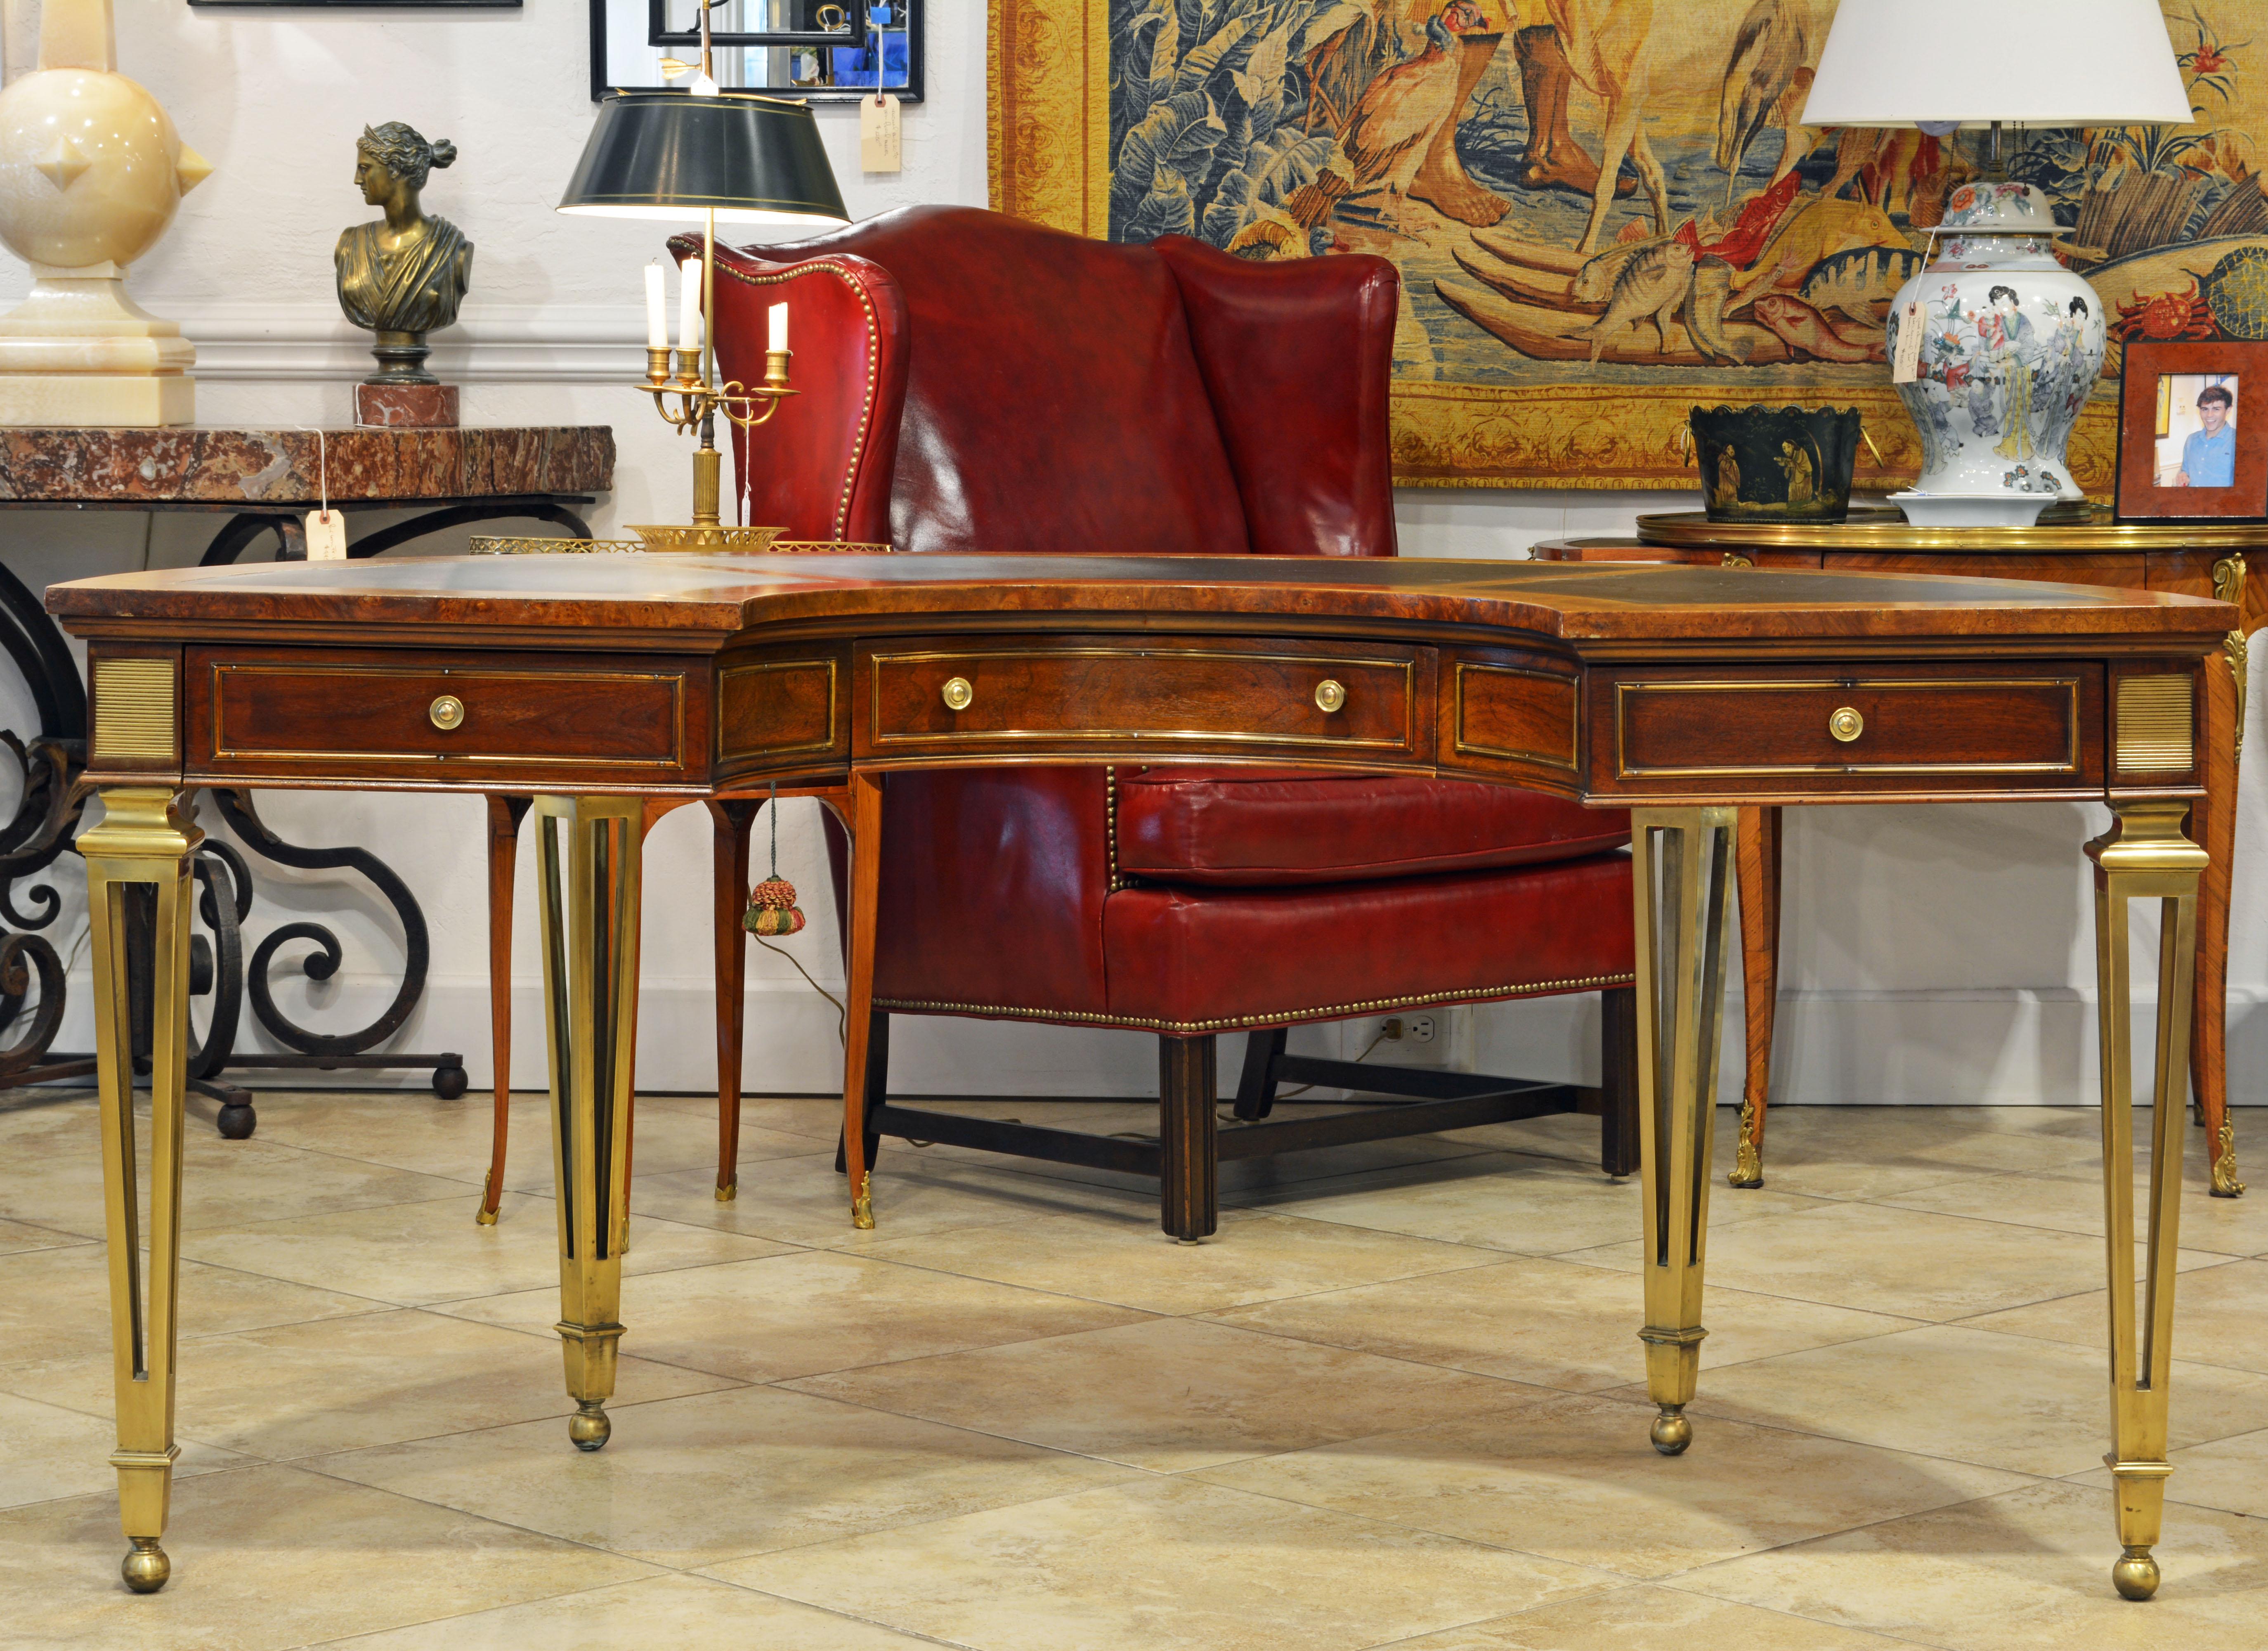 This magnificent mastercraft semi-circular desk features a top inlaid with three panels of gilt tooled leather above three brass trimmed drawers and brass trimmed panels on the back. The desk is resting on four elegantly designed tapering brass legs